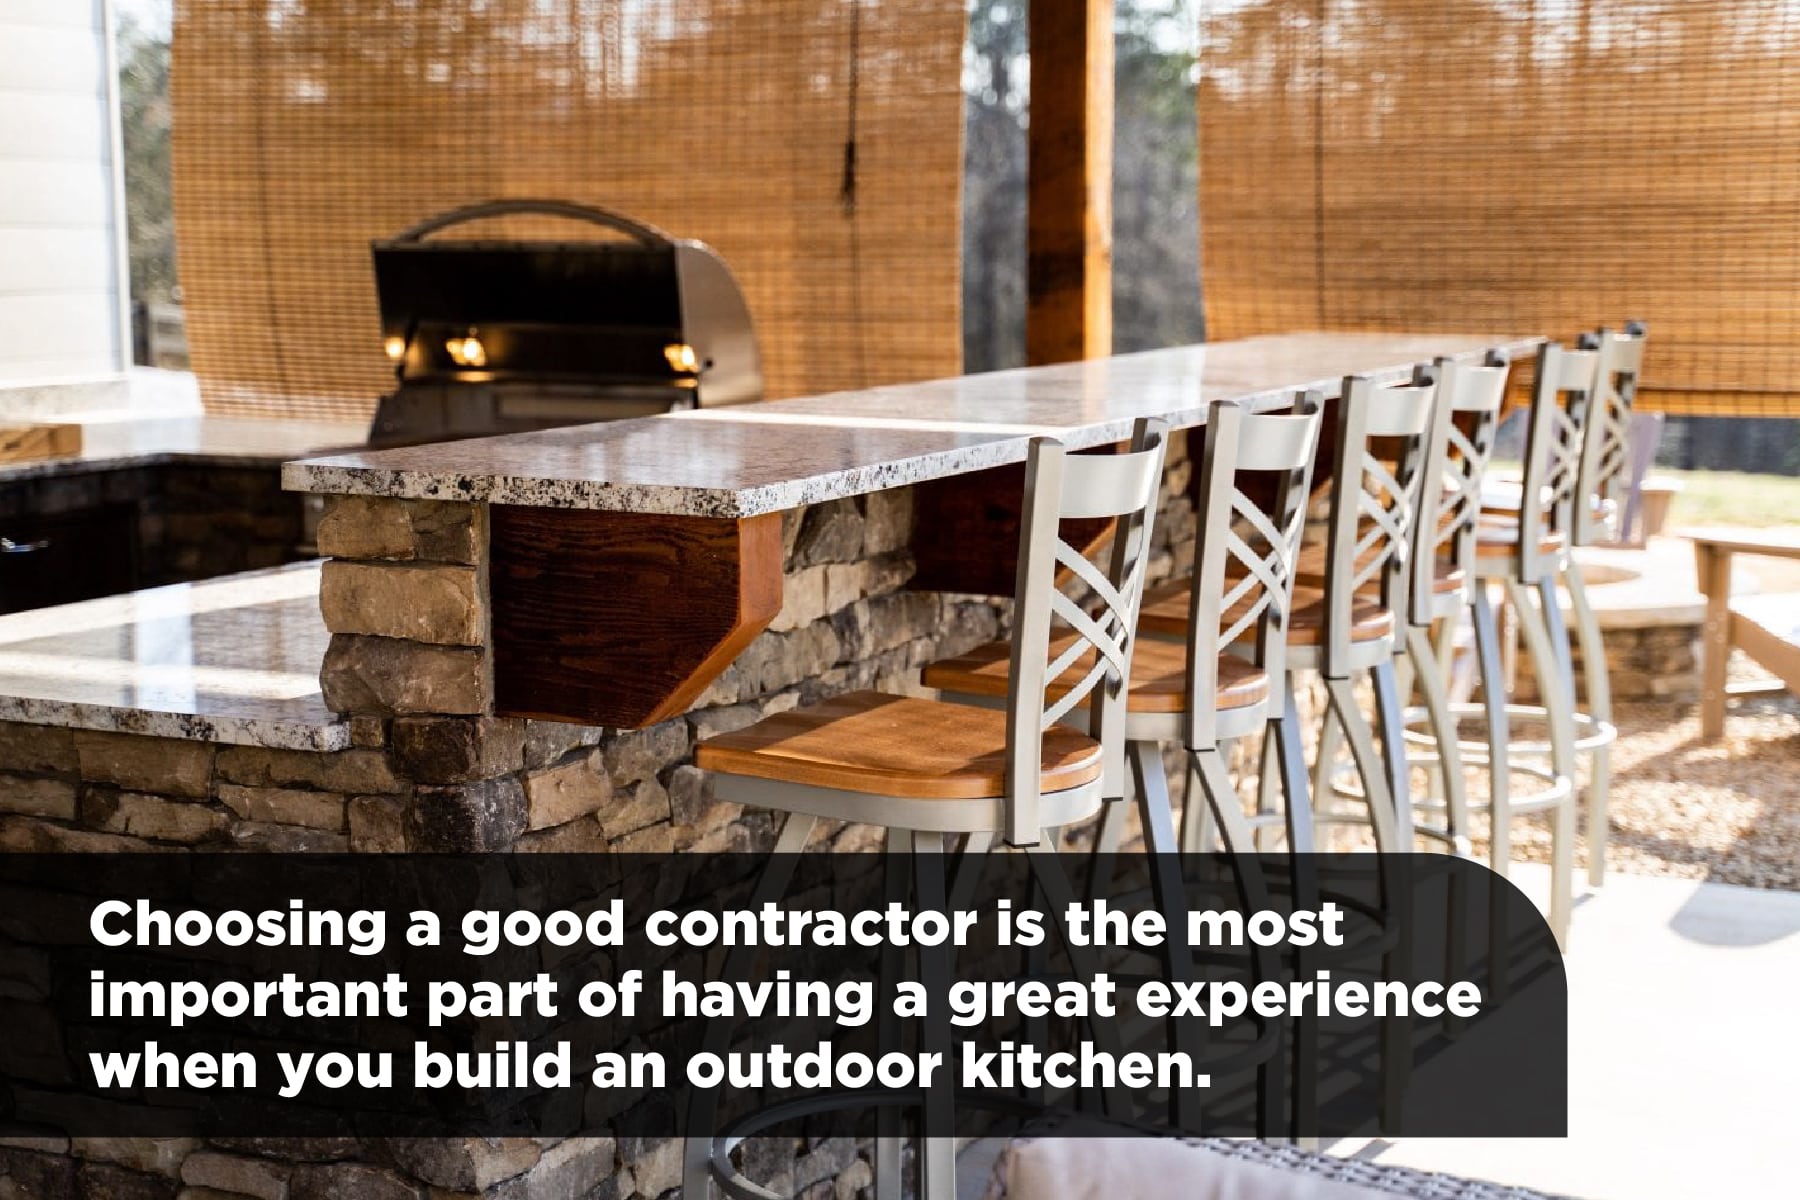 choose a good contractor when building an outdoor kitchen